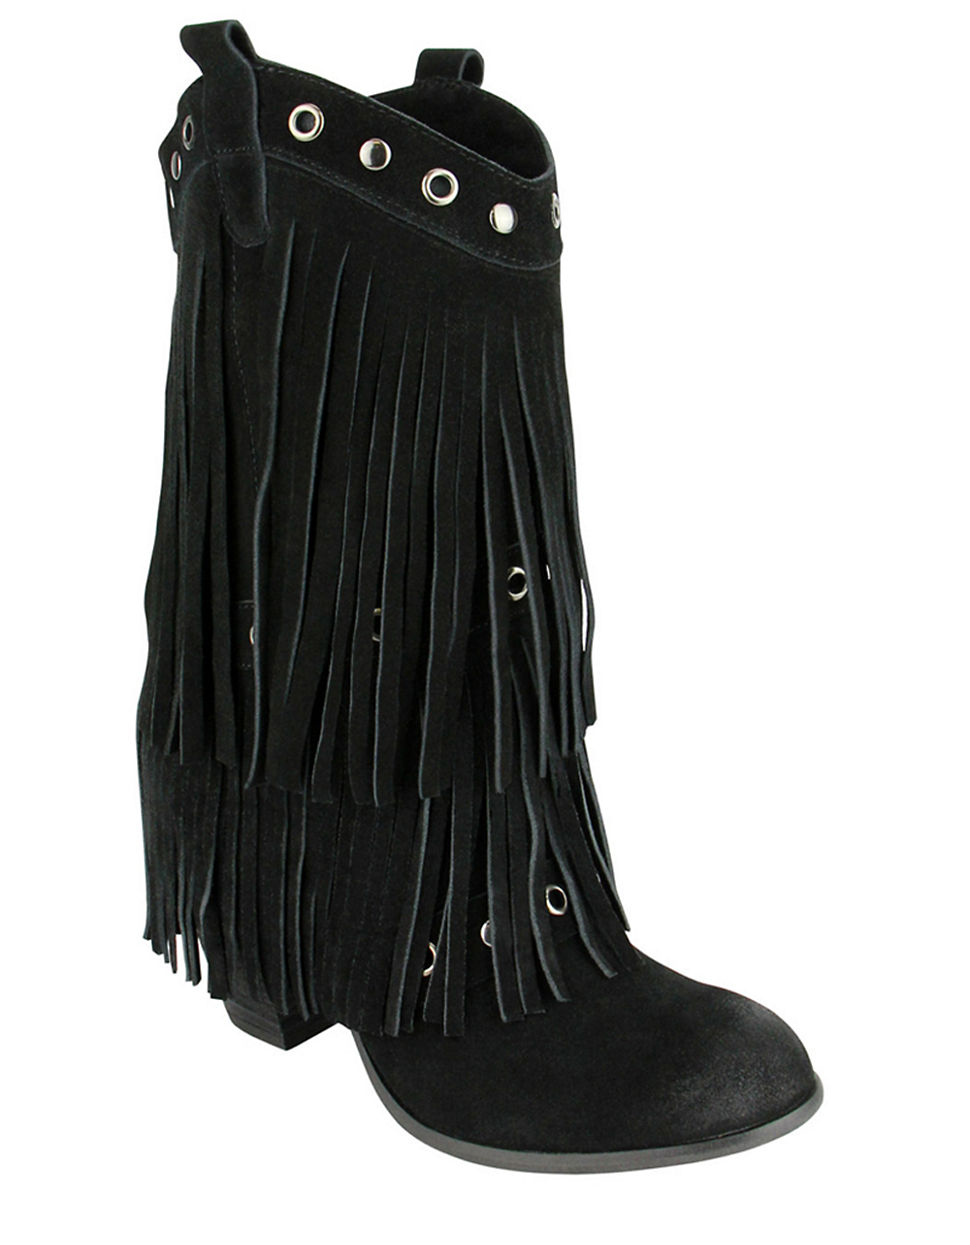 Lyst - Naughty Monkey Kickin In Frindged Suede Mid-calf Boots in Black